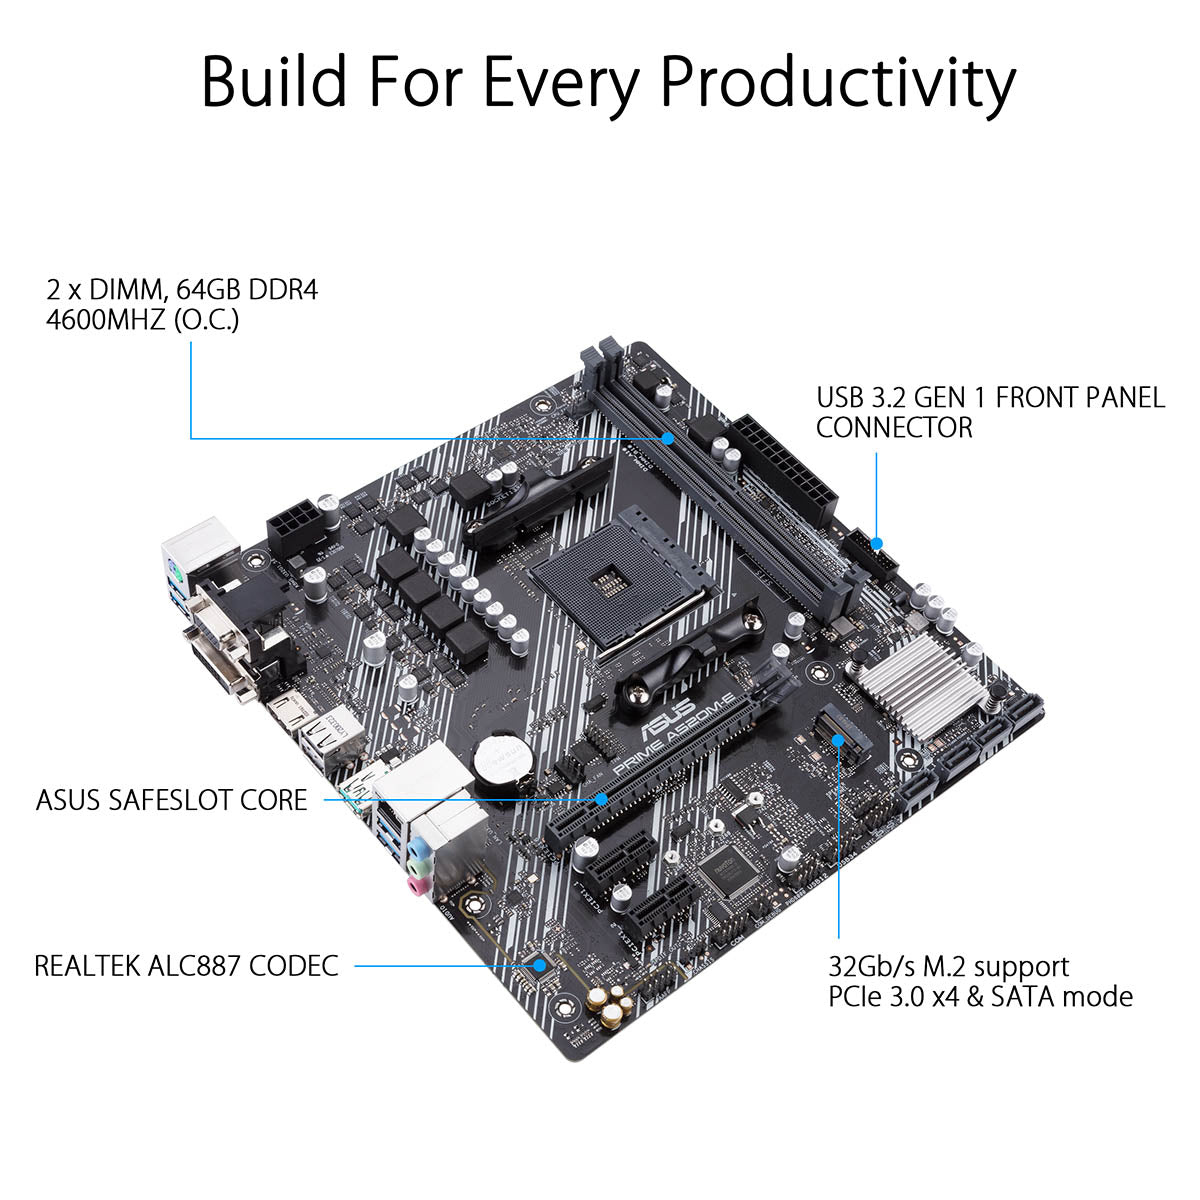 ASUS Prime A520M-E AMD AM4 Micro-ATX Motherboard with DDR4 4866MHz M.2 and USB 3.2 Gen 2